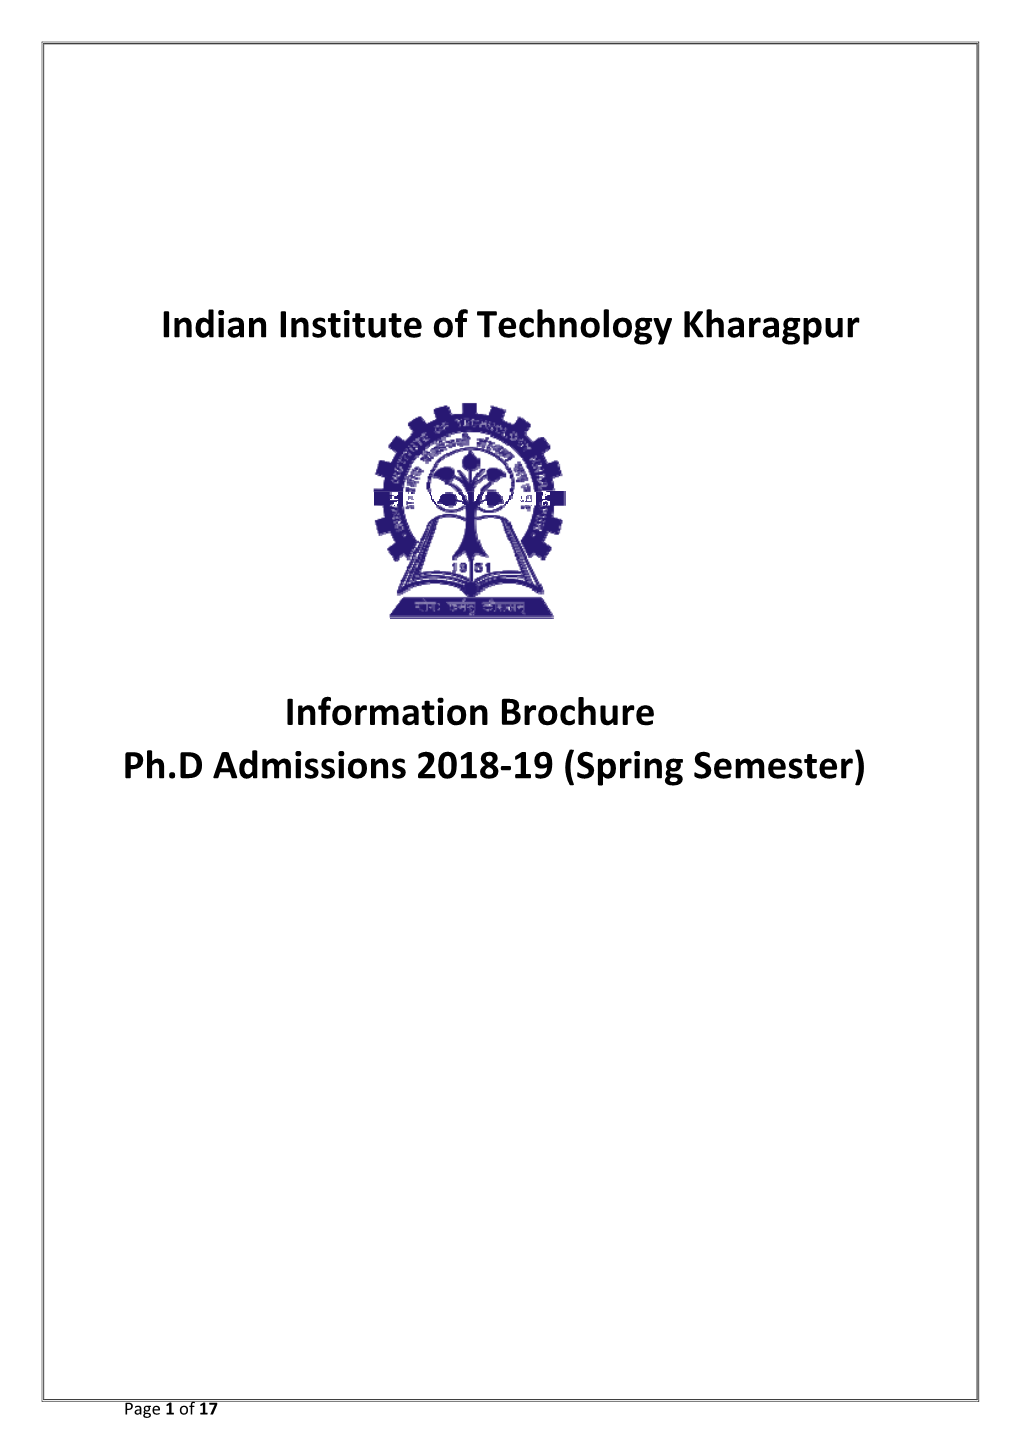 IIT Kharagpur Has Grown Into One of the Largest and Most Well‐Known Technological Institutes of the Country